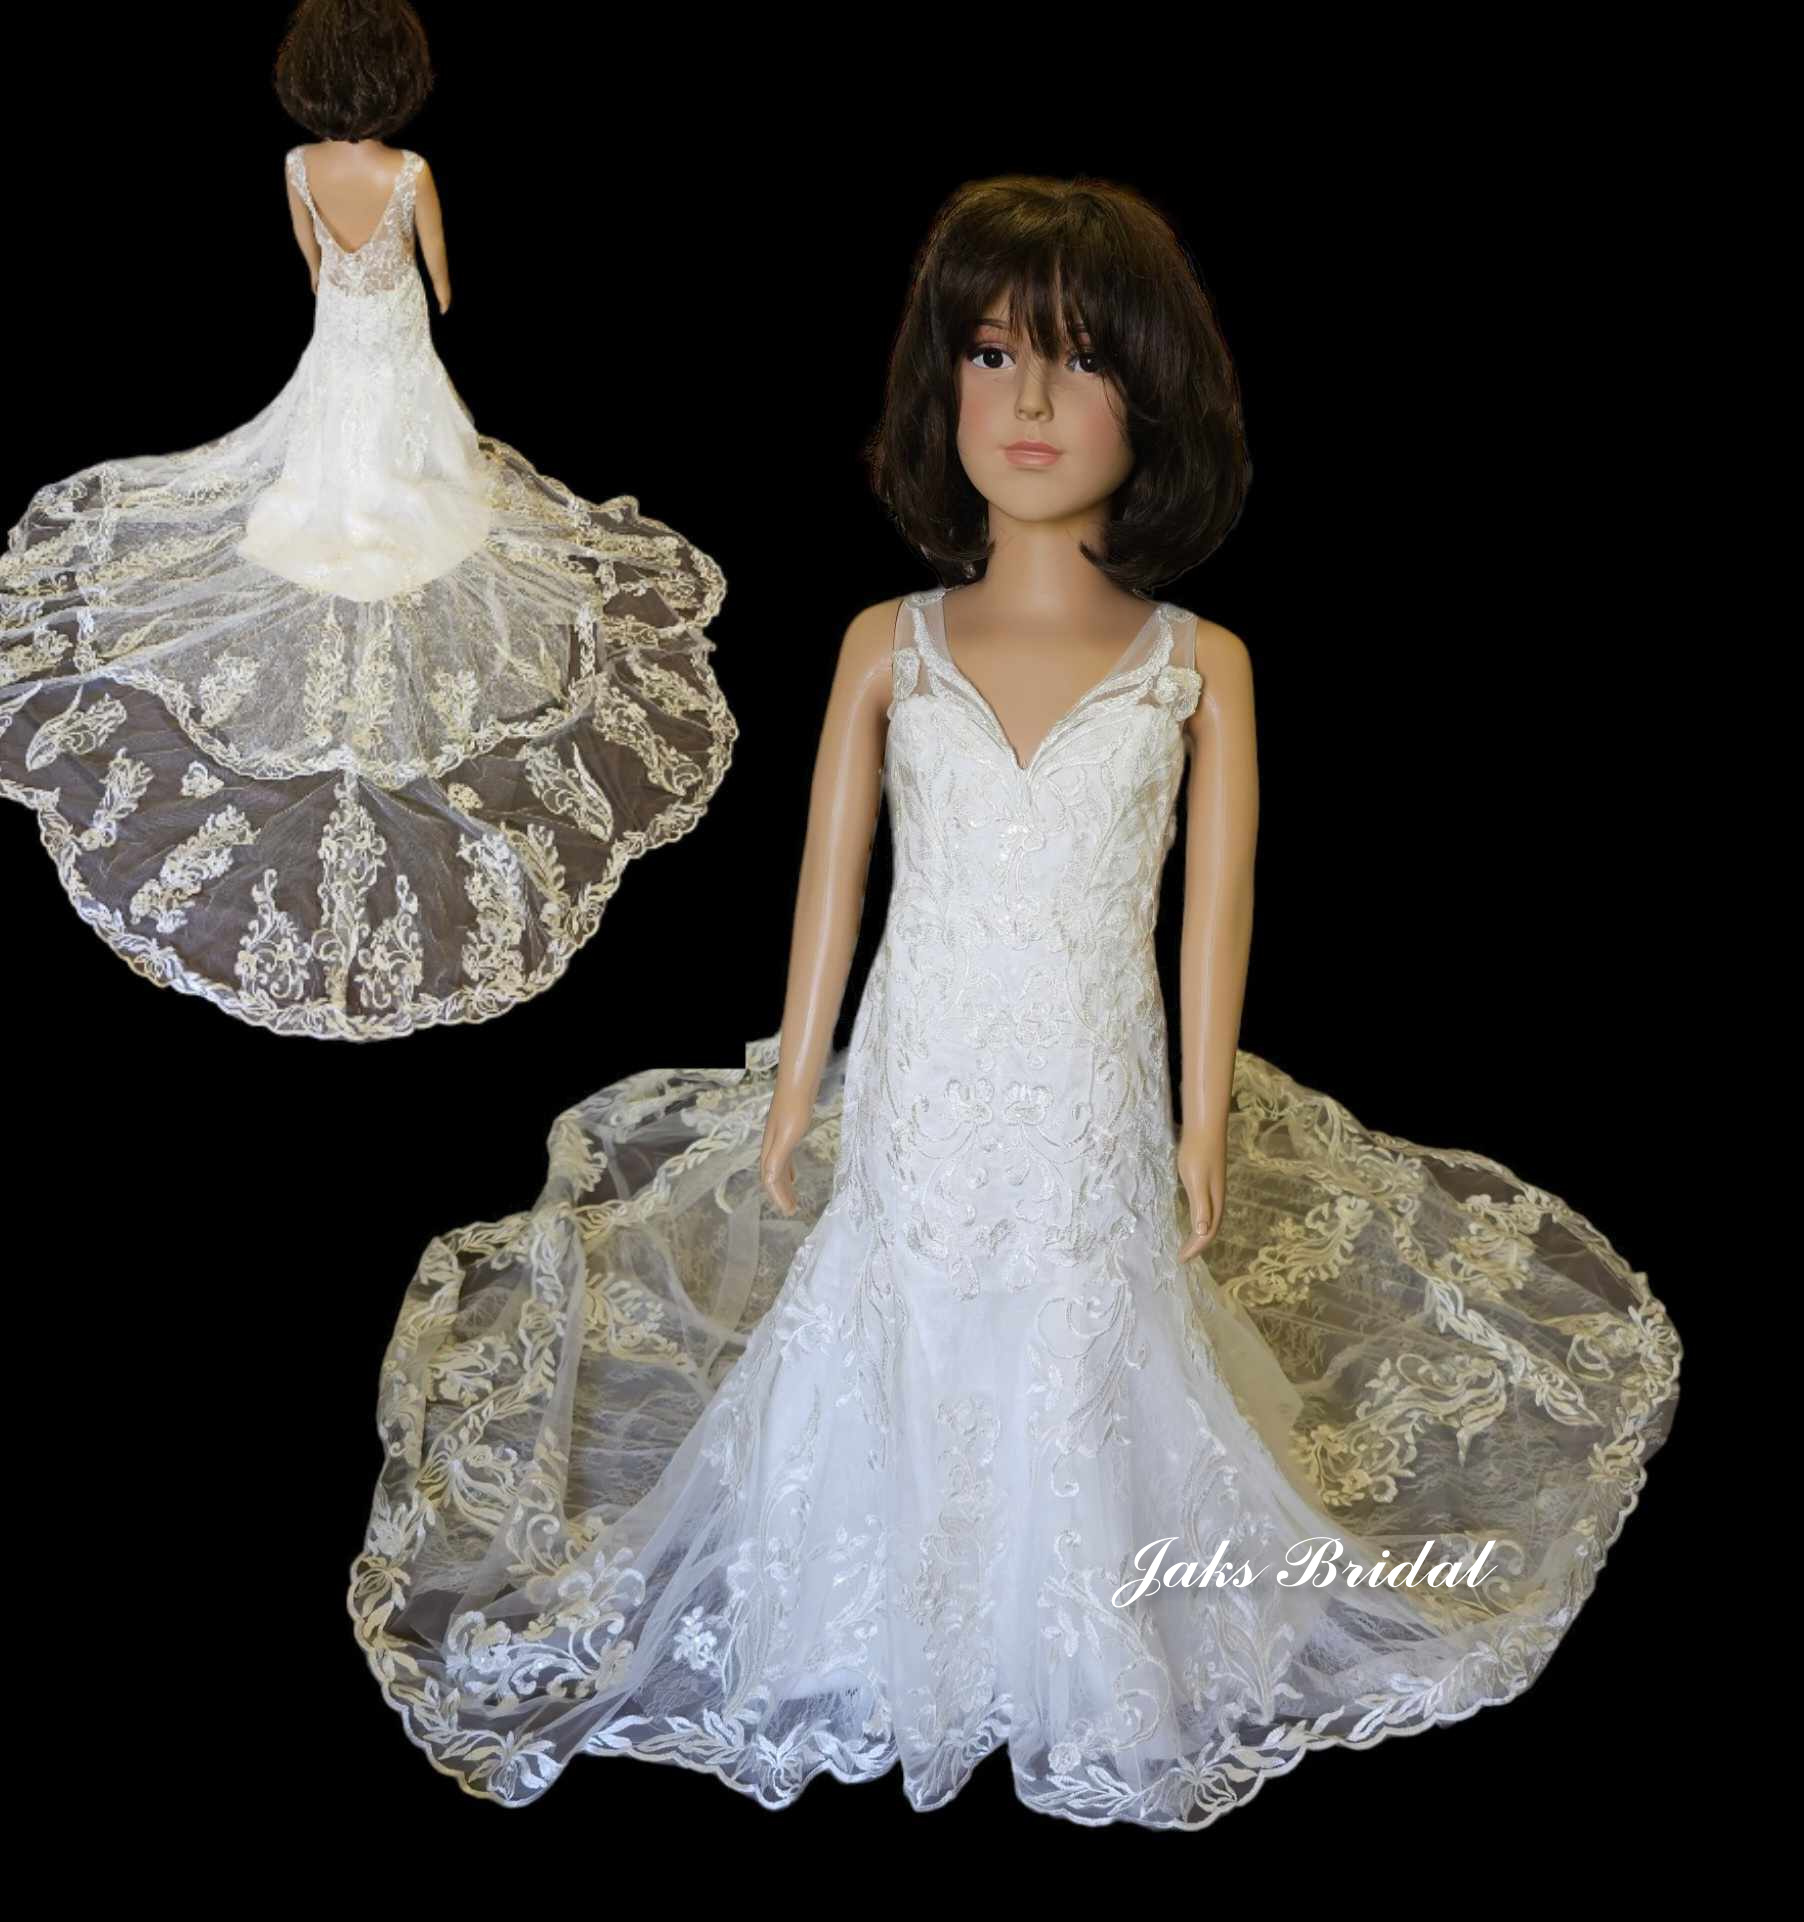 Lace fit and flare flower girl gown features sequin lace, a sweetheart neck, a low sheer back, illusion double petal shaped cathedral train.